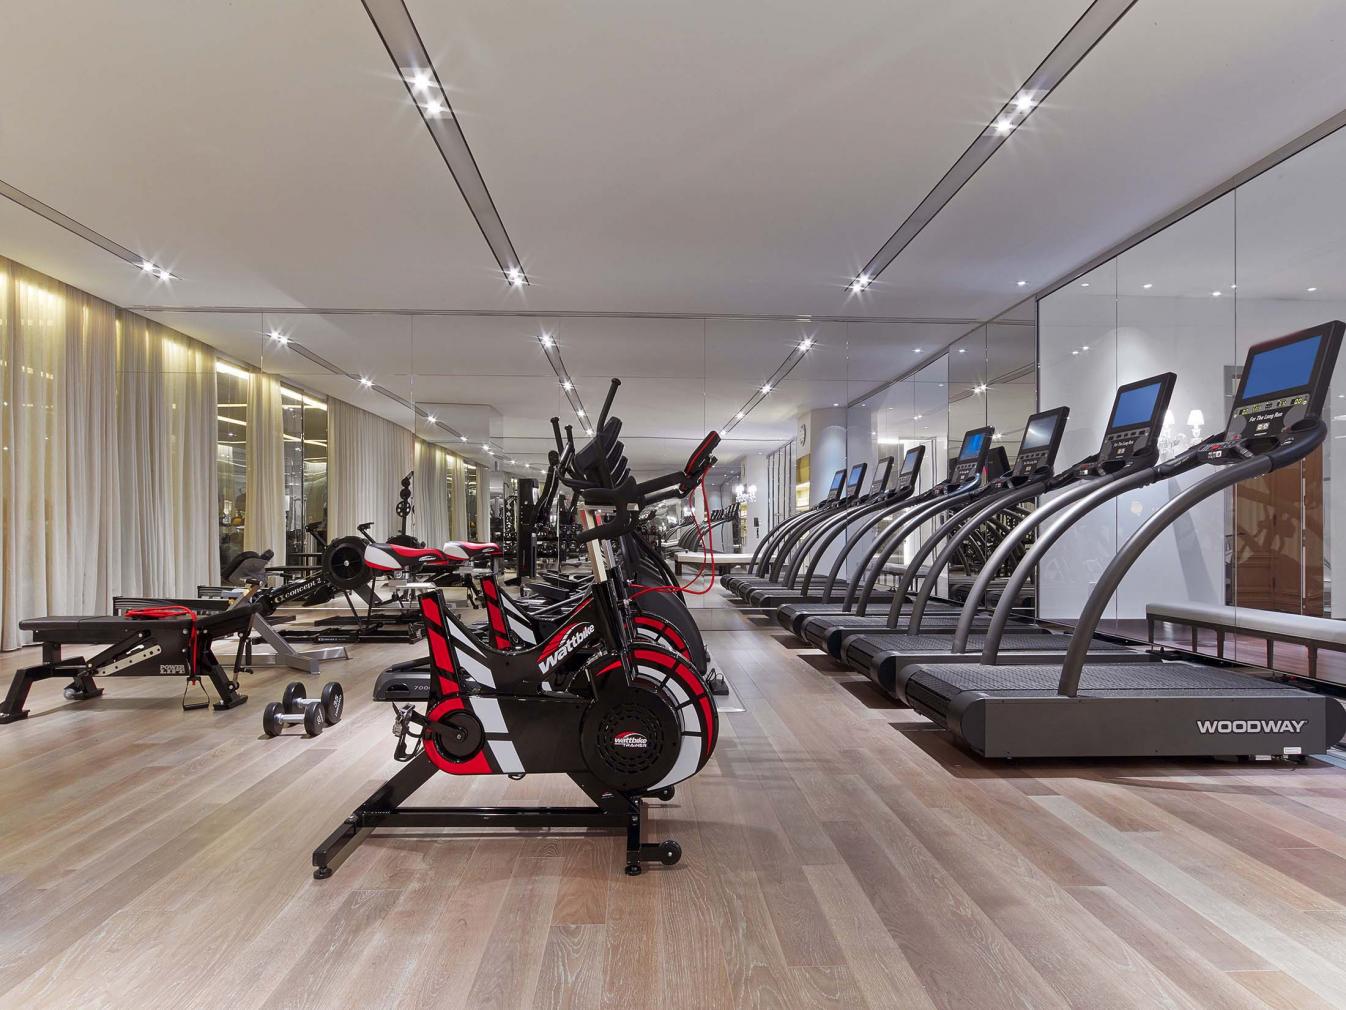 Exercise benches, row machines, stationary bicycles, and treadmills are situated from left to right, within the Baccarat's fitness facility